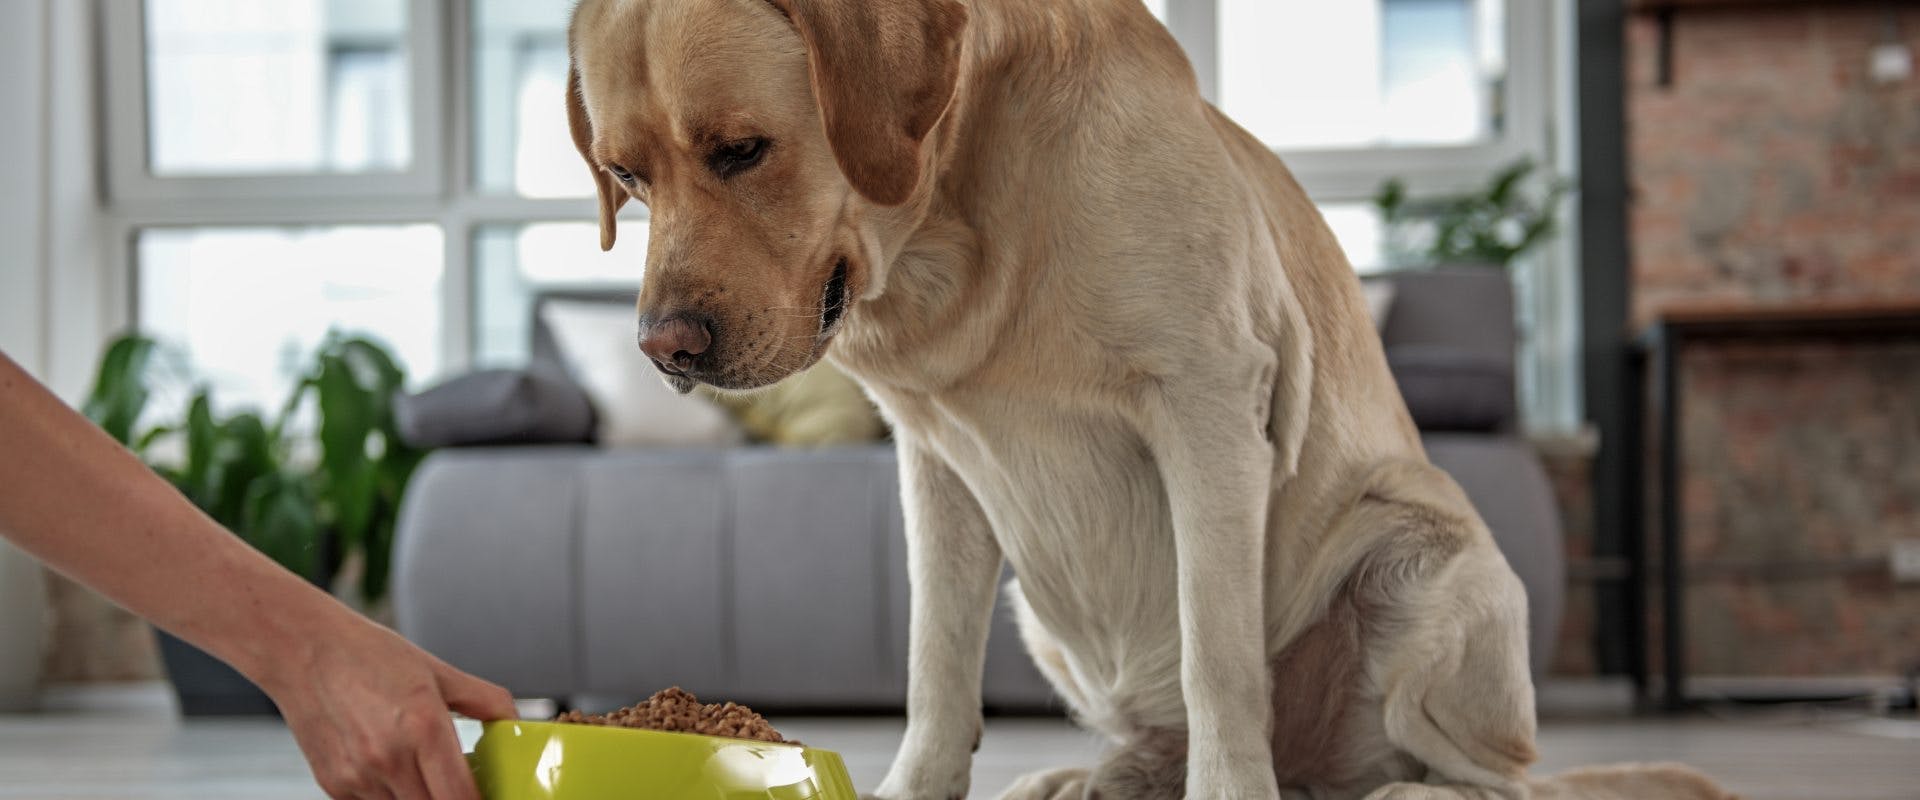 Dog looking at food and not eating.